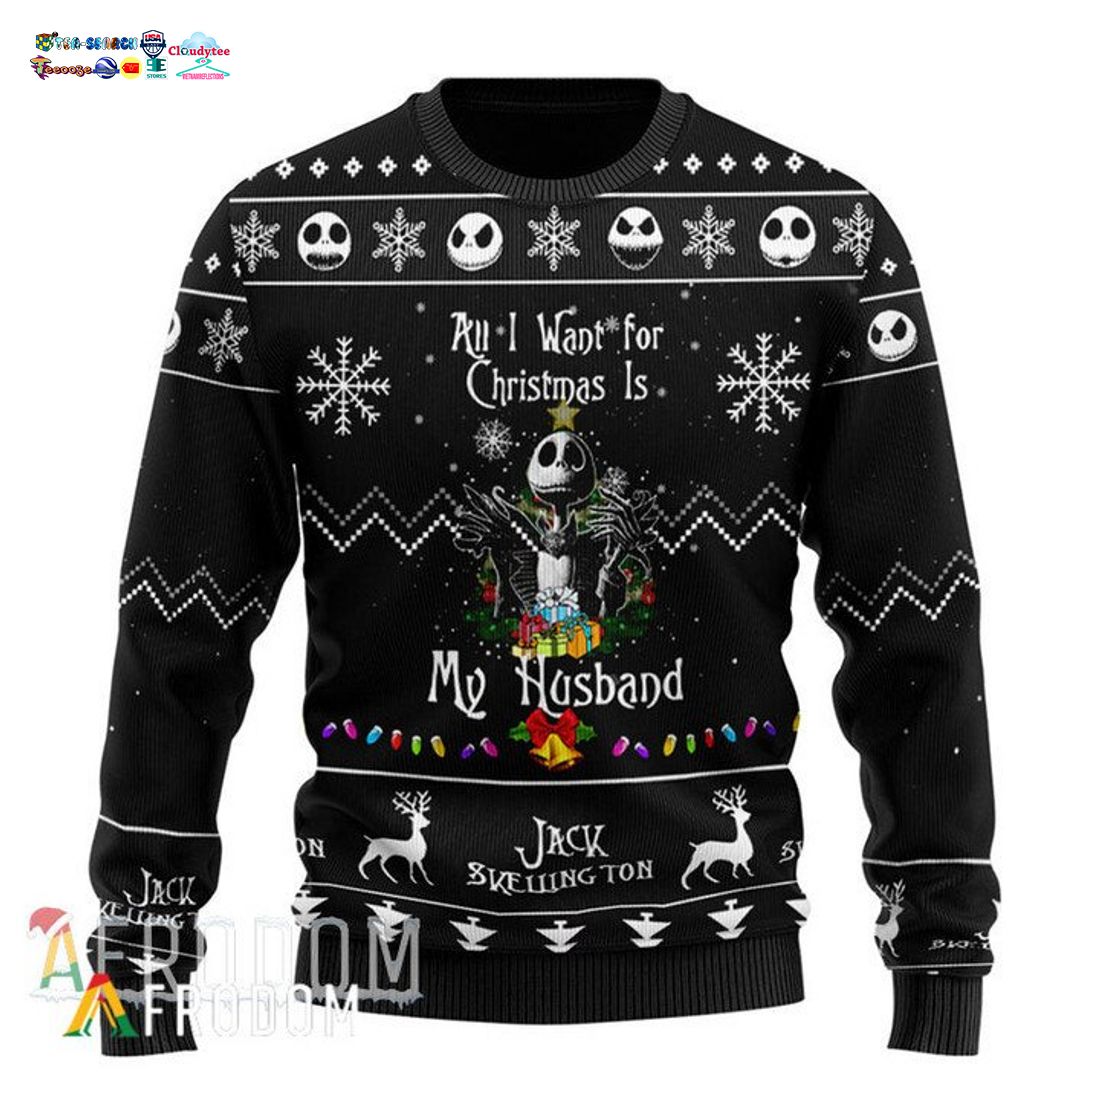 All I Want For Christmas Is My Husband Jack Skellington Christmas Sweater